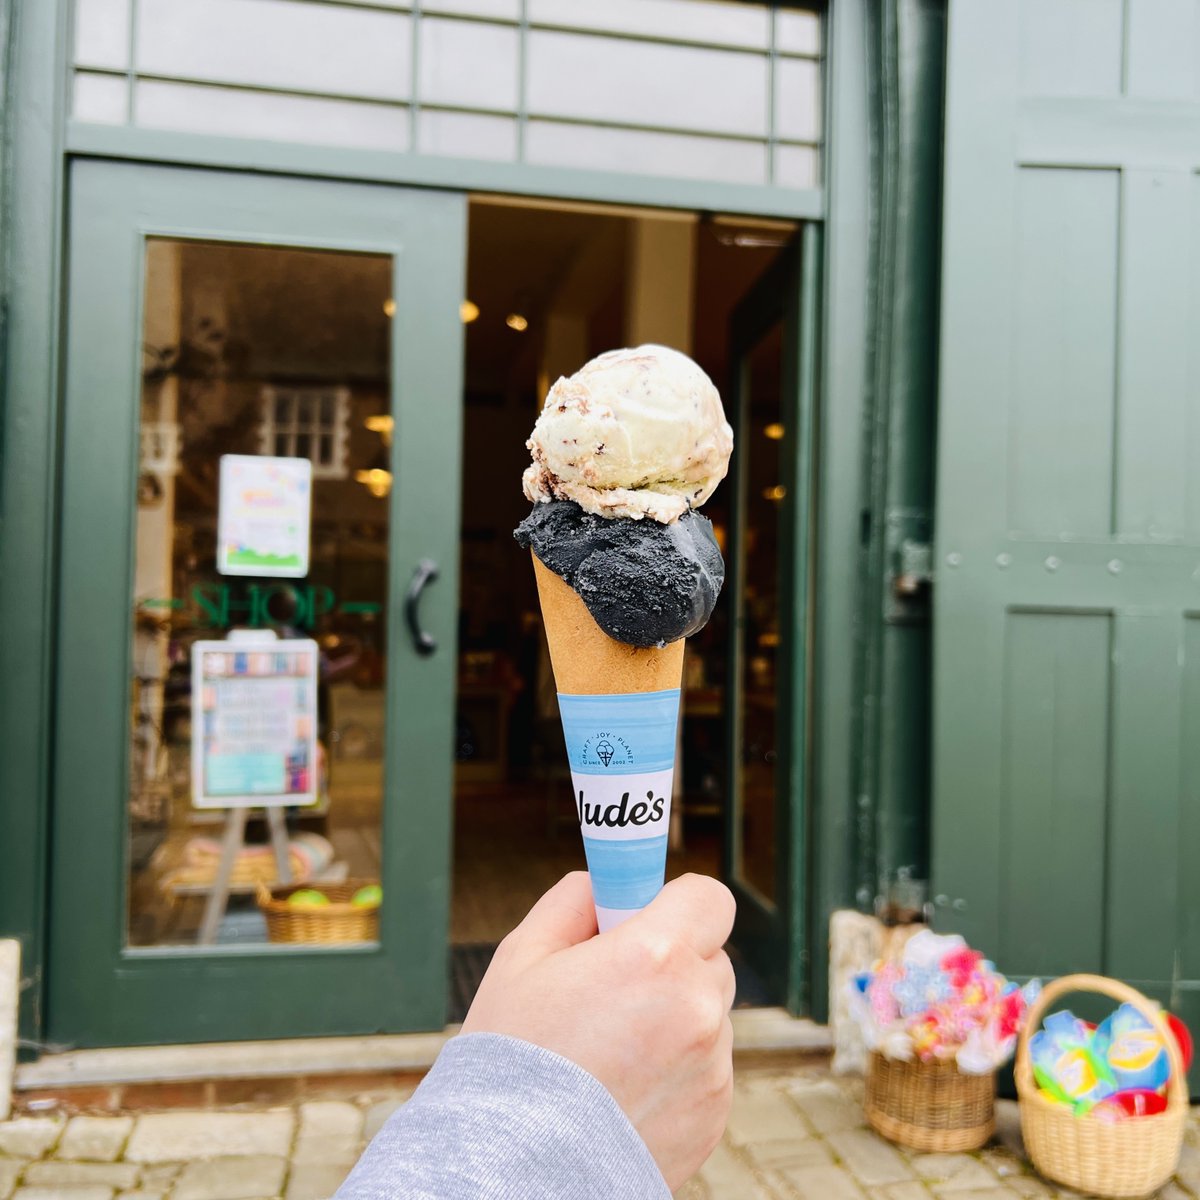 Jude’s Ice Cream is here for Easter weekends! On your visit to Osterley today, spot our Jude’s Ice Cream parlour in the Tudor Courtyard. Enjoy a scoop or 2 of rich Ice cream in a tub or a cone from Salted Caramel, Mint Chocolate to Madagascan Vanilla or plant-based options🎉